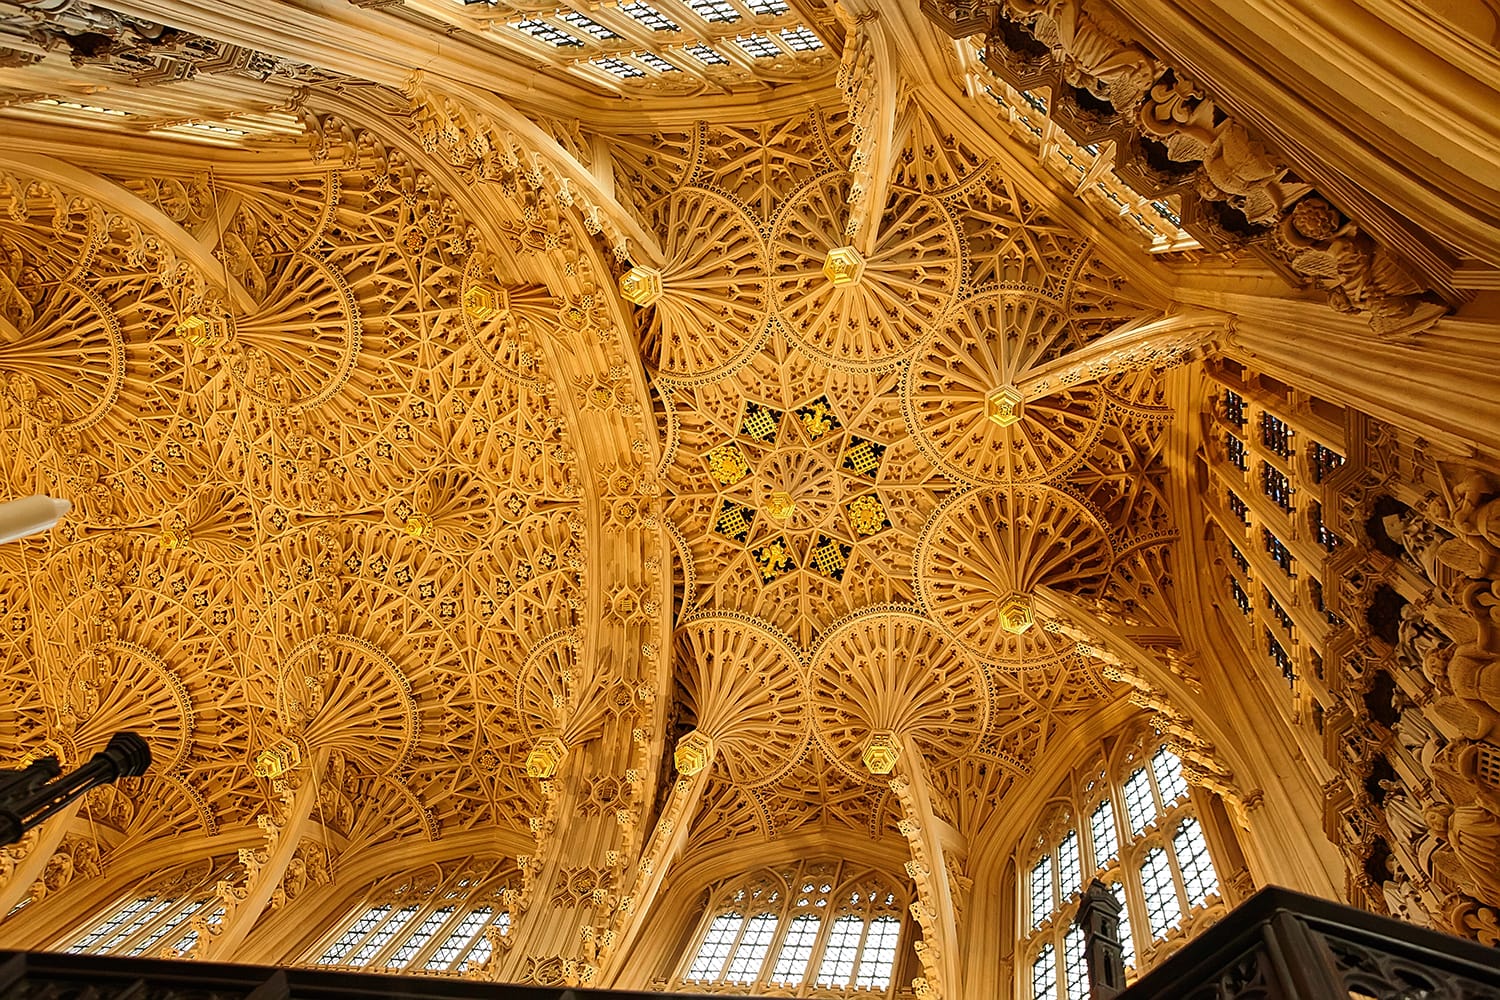 Ceiling of the Westminster Abbey in London, UK